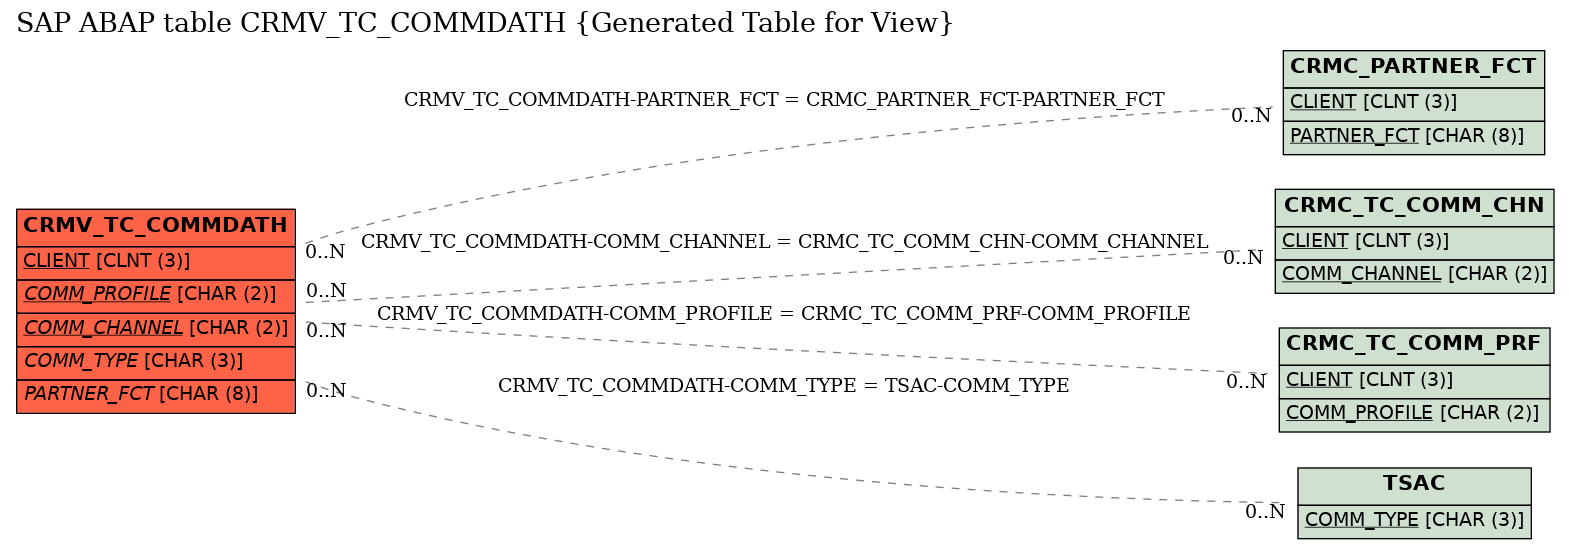 E-R Diagram for table CRMV_TC_COMMDATH (Generated Table for View)